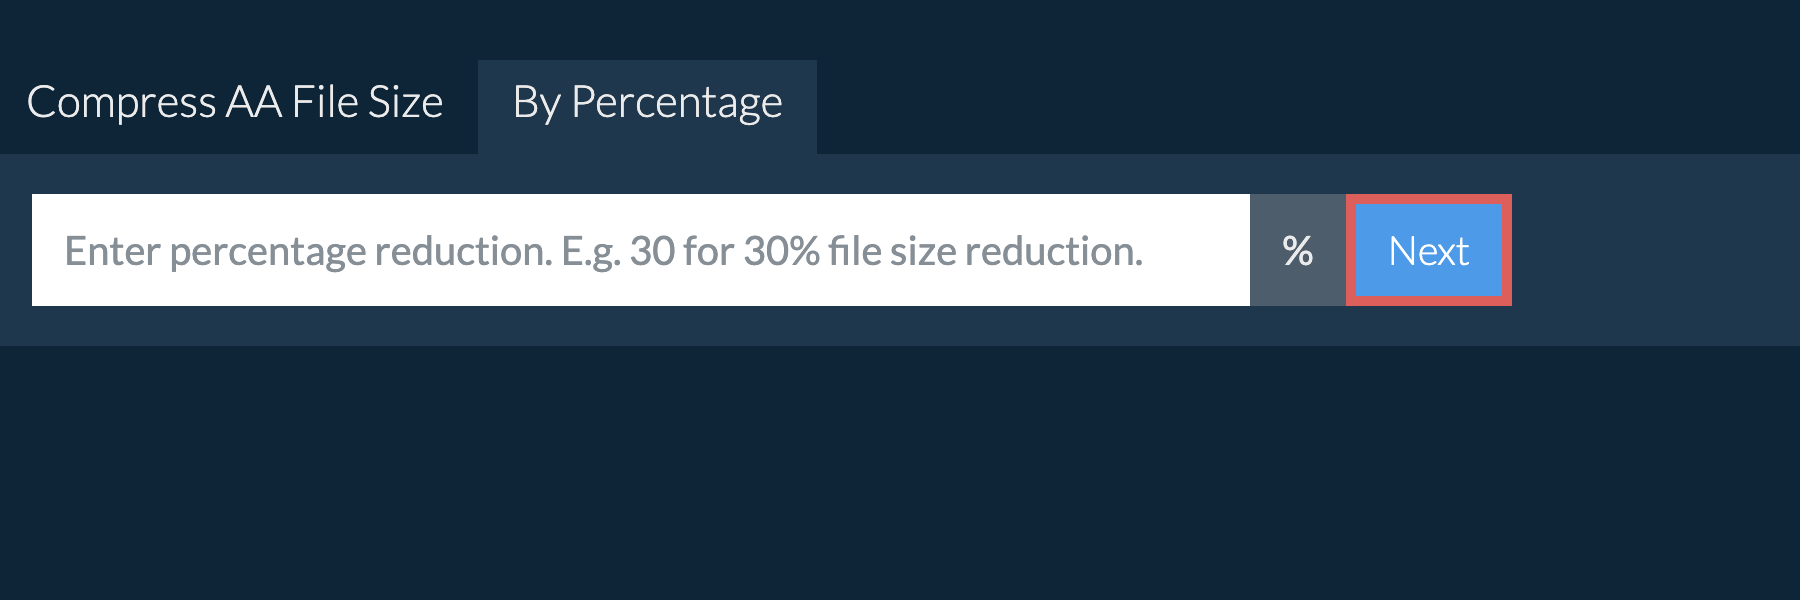 Reduce aa By Percentage